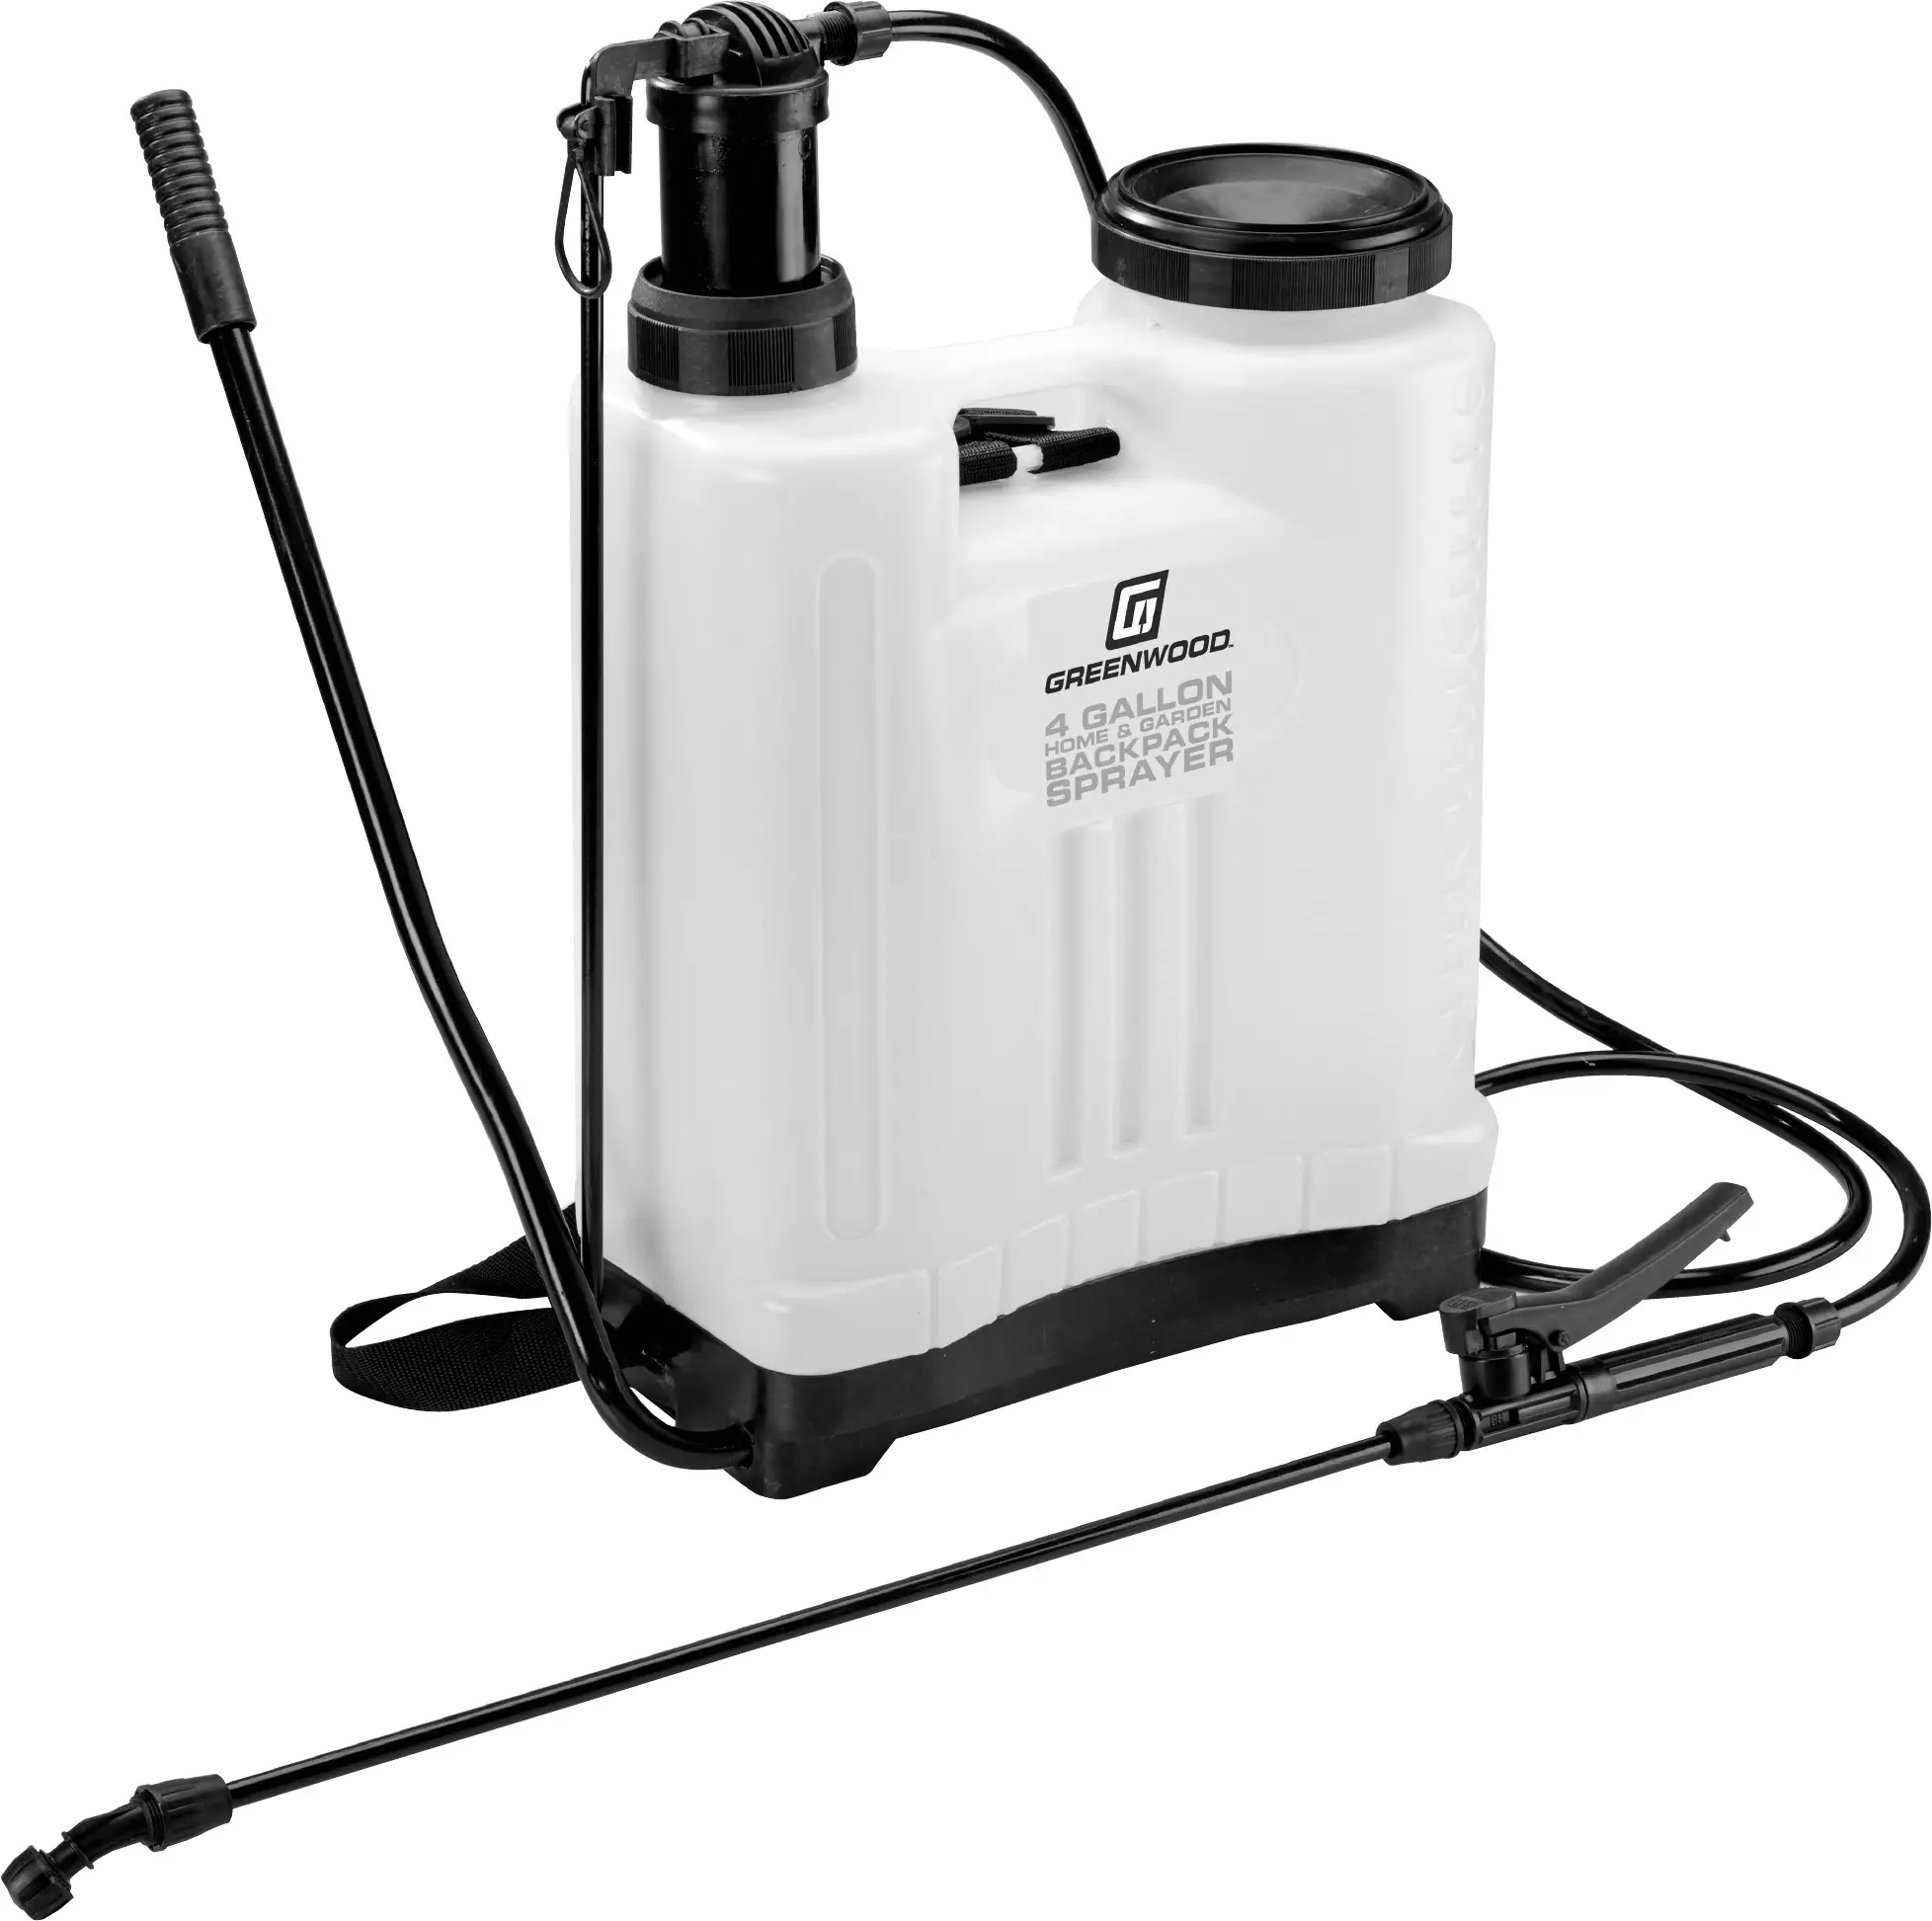 GREENWOOD-63092-4-Gallon-Home-and-Garden-Backpack-Sprayer-product-image